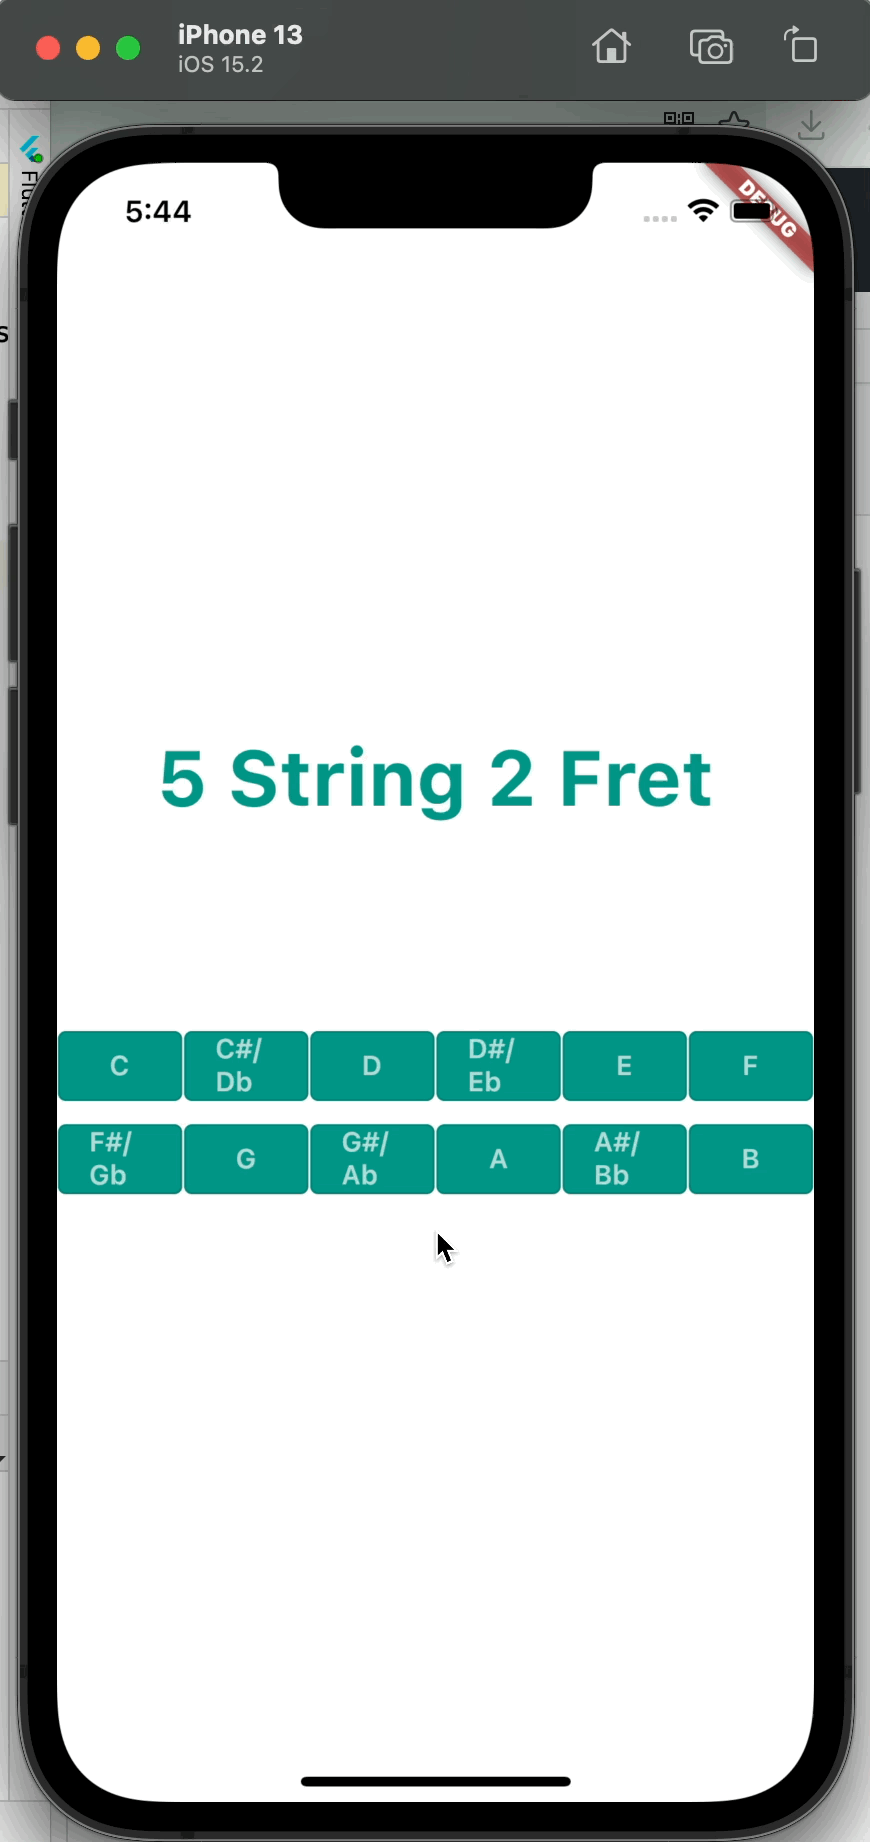 An app to help you to remember notes on guitar fretboard